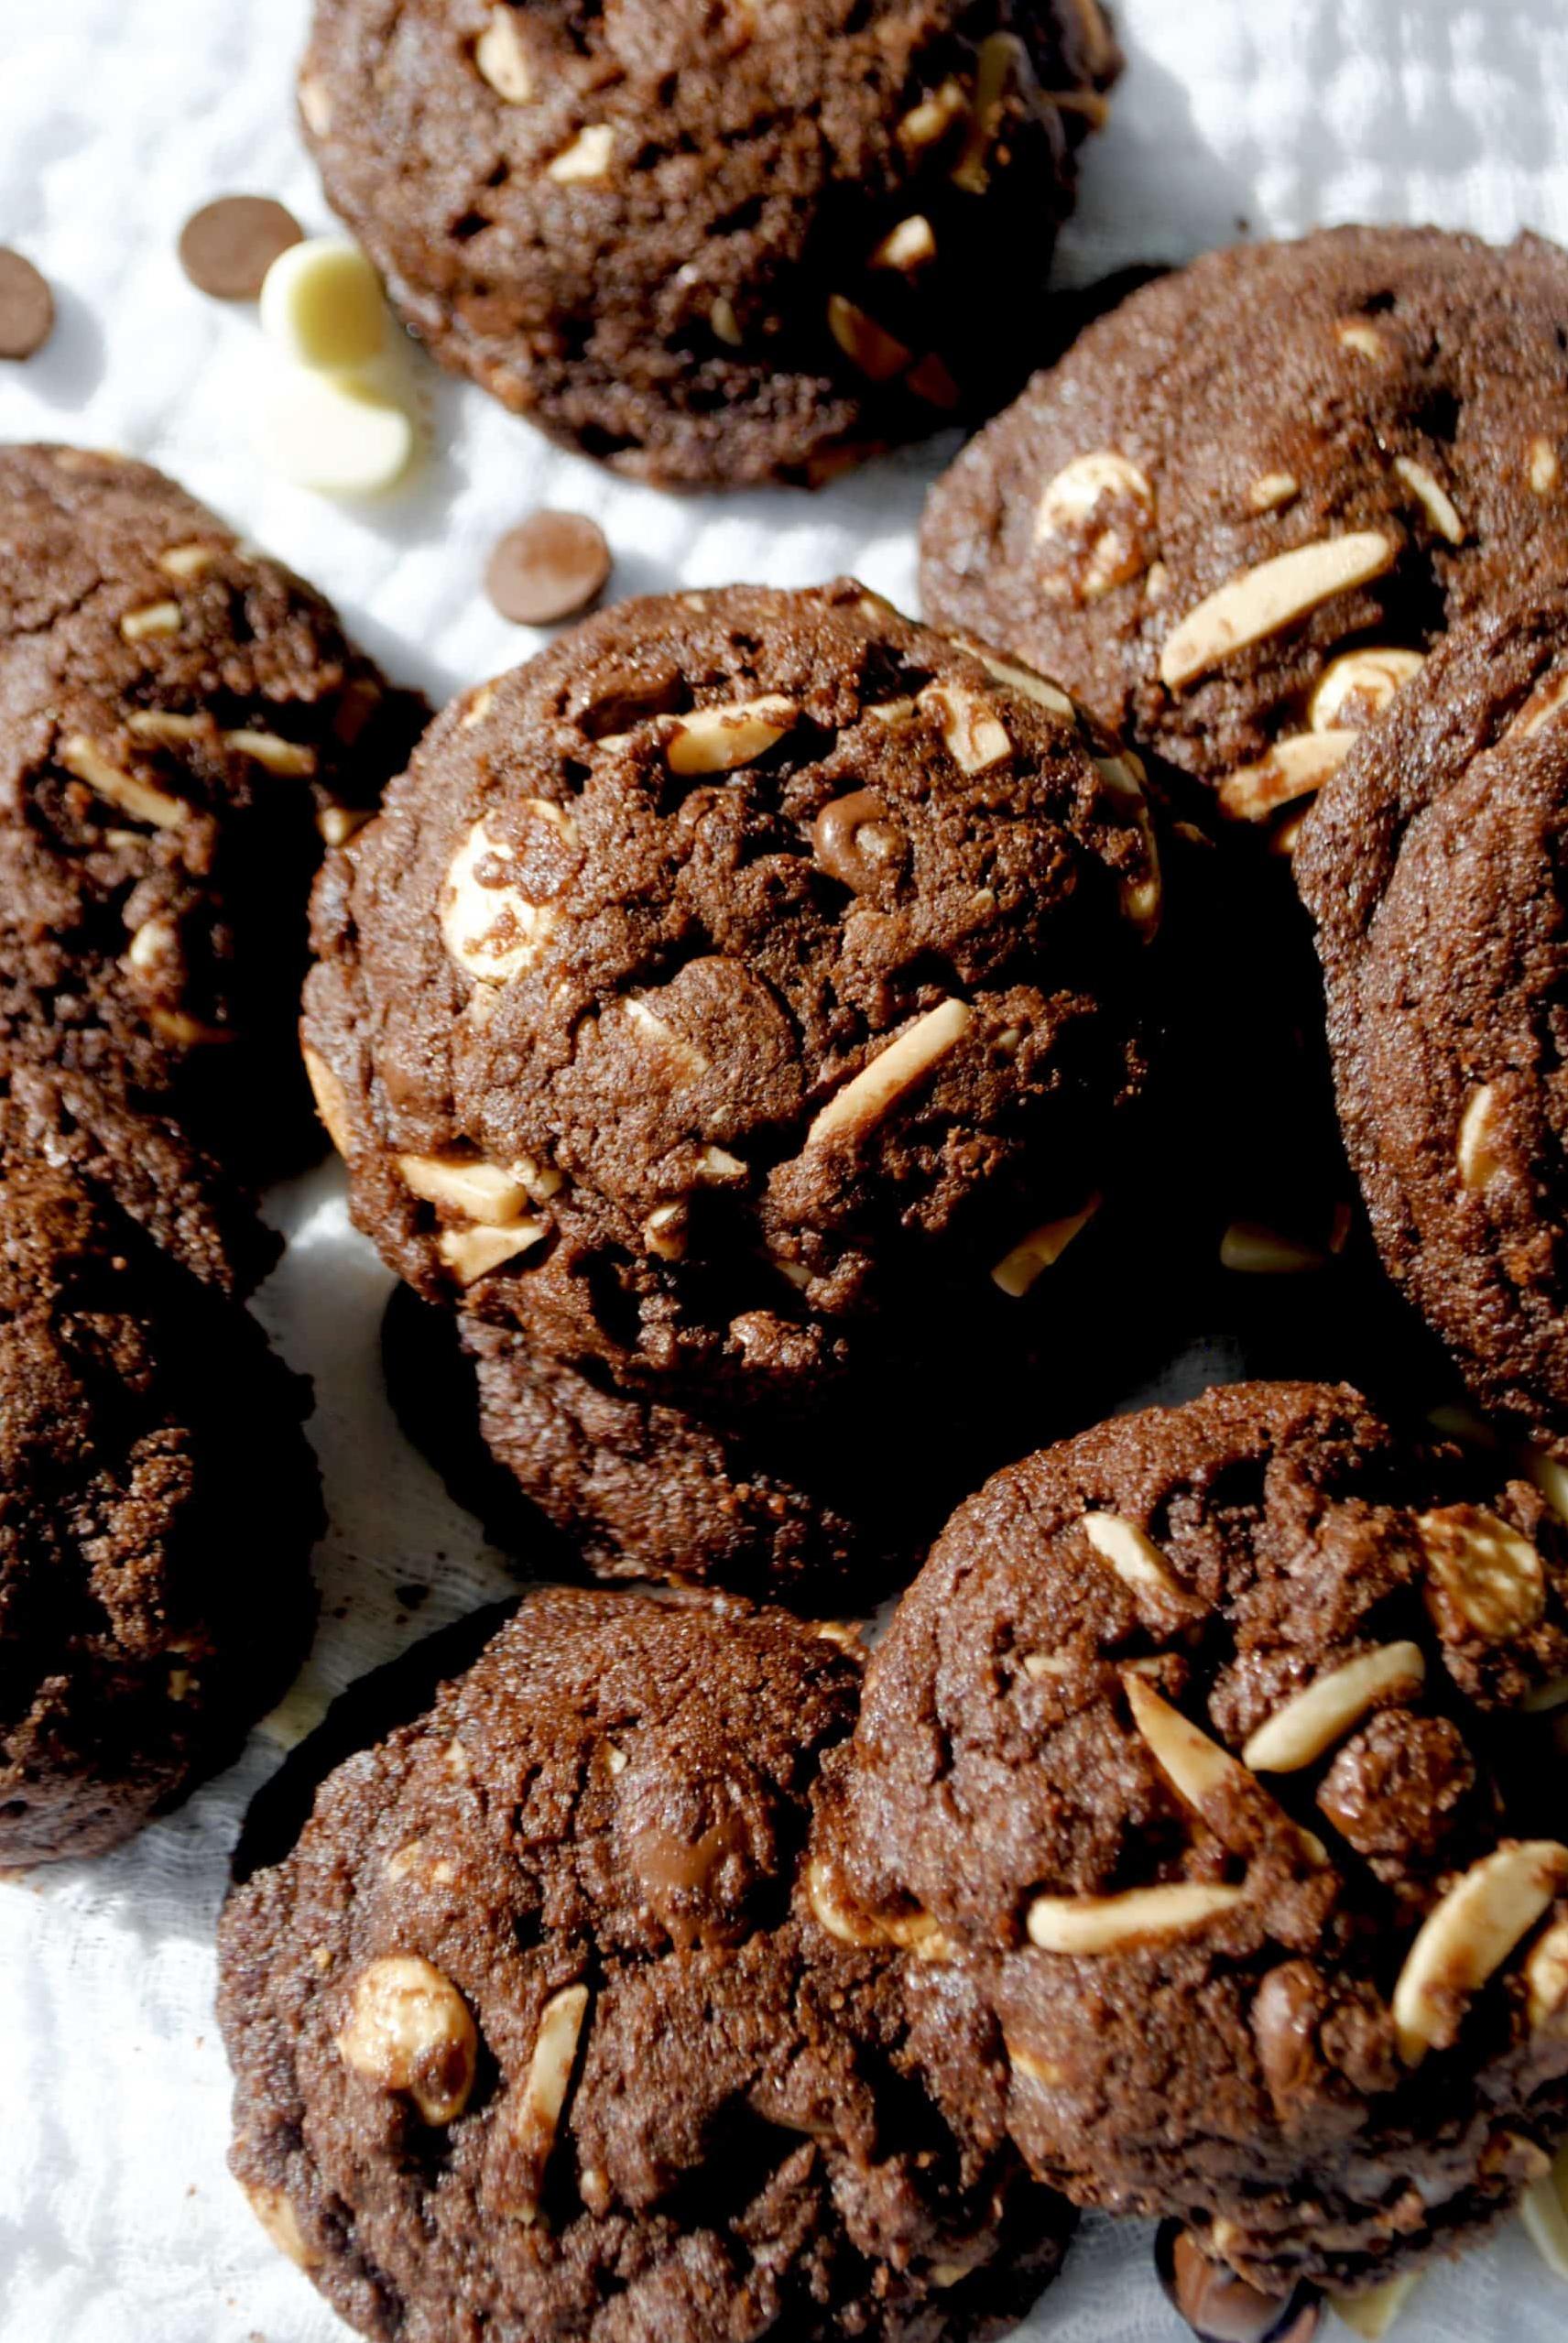  Coffee and chocolate chunk, a match made in heaven - try these espresso cookies and you'll know what we mean.